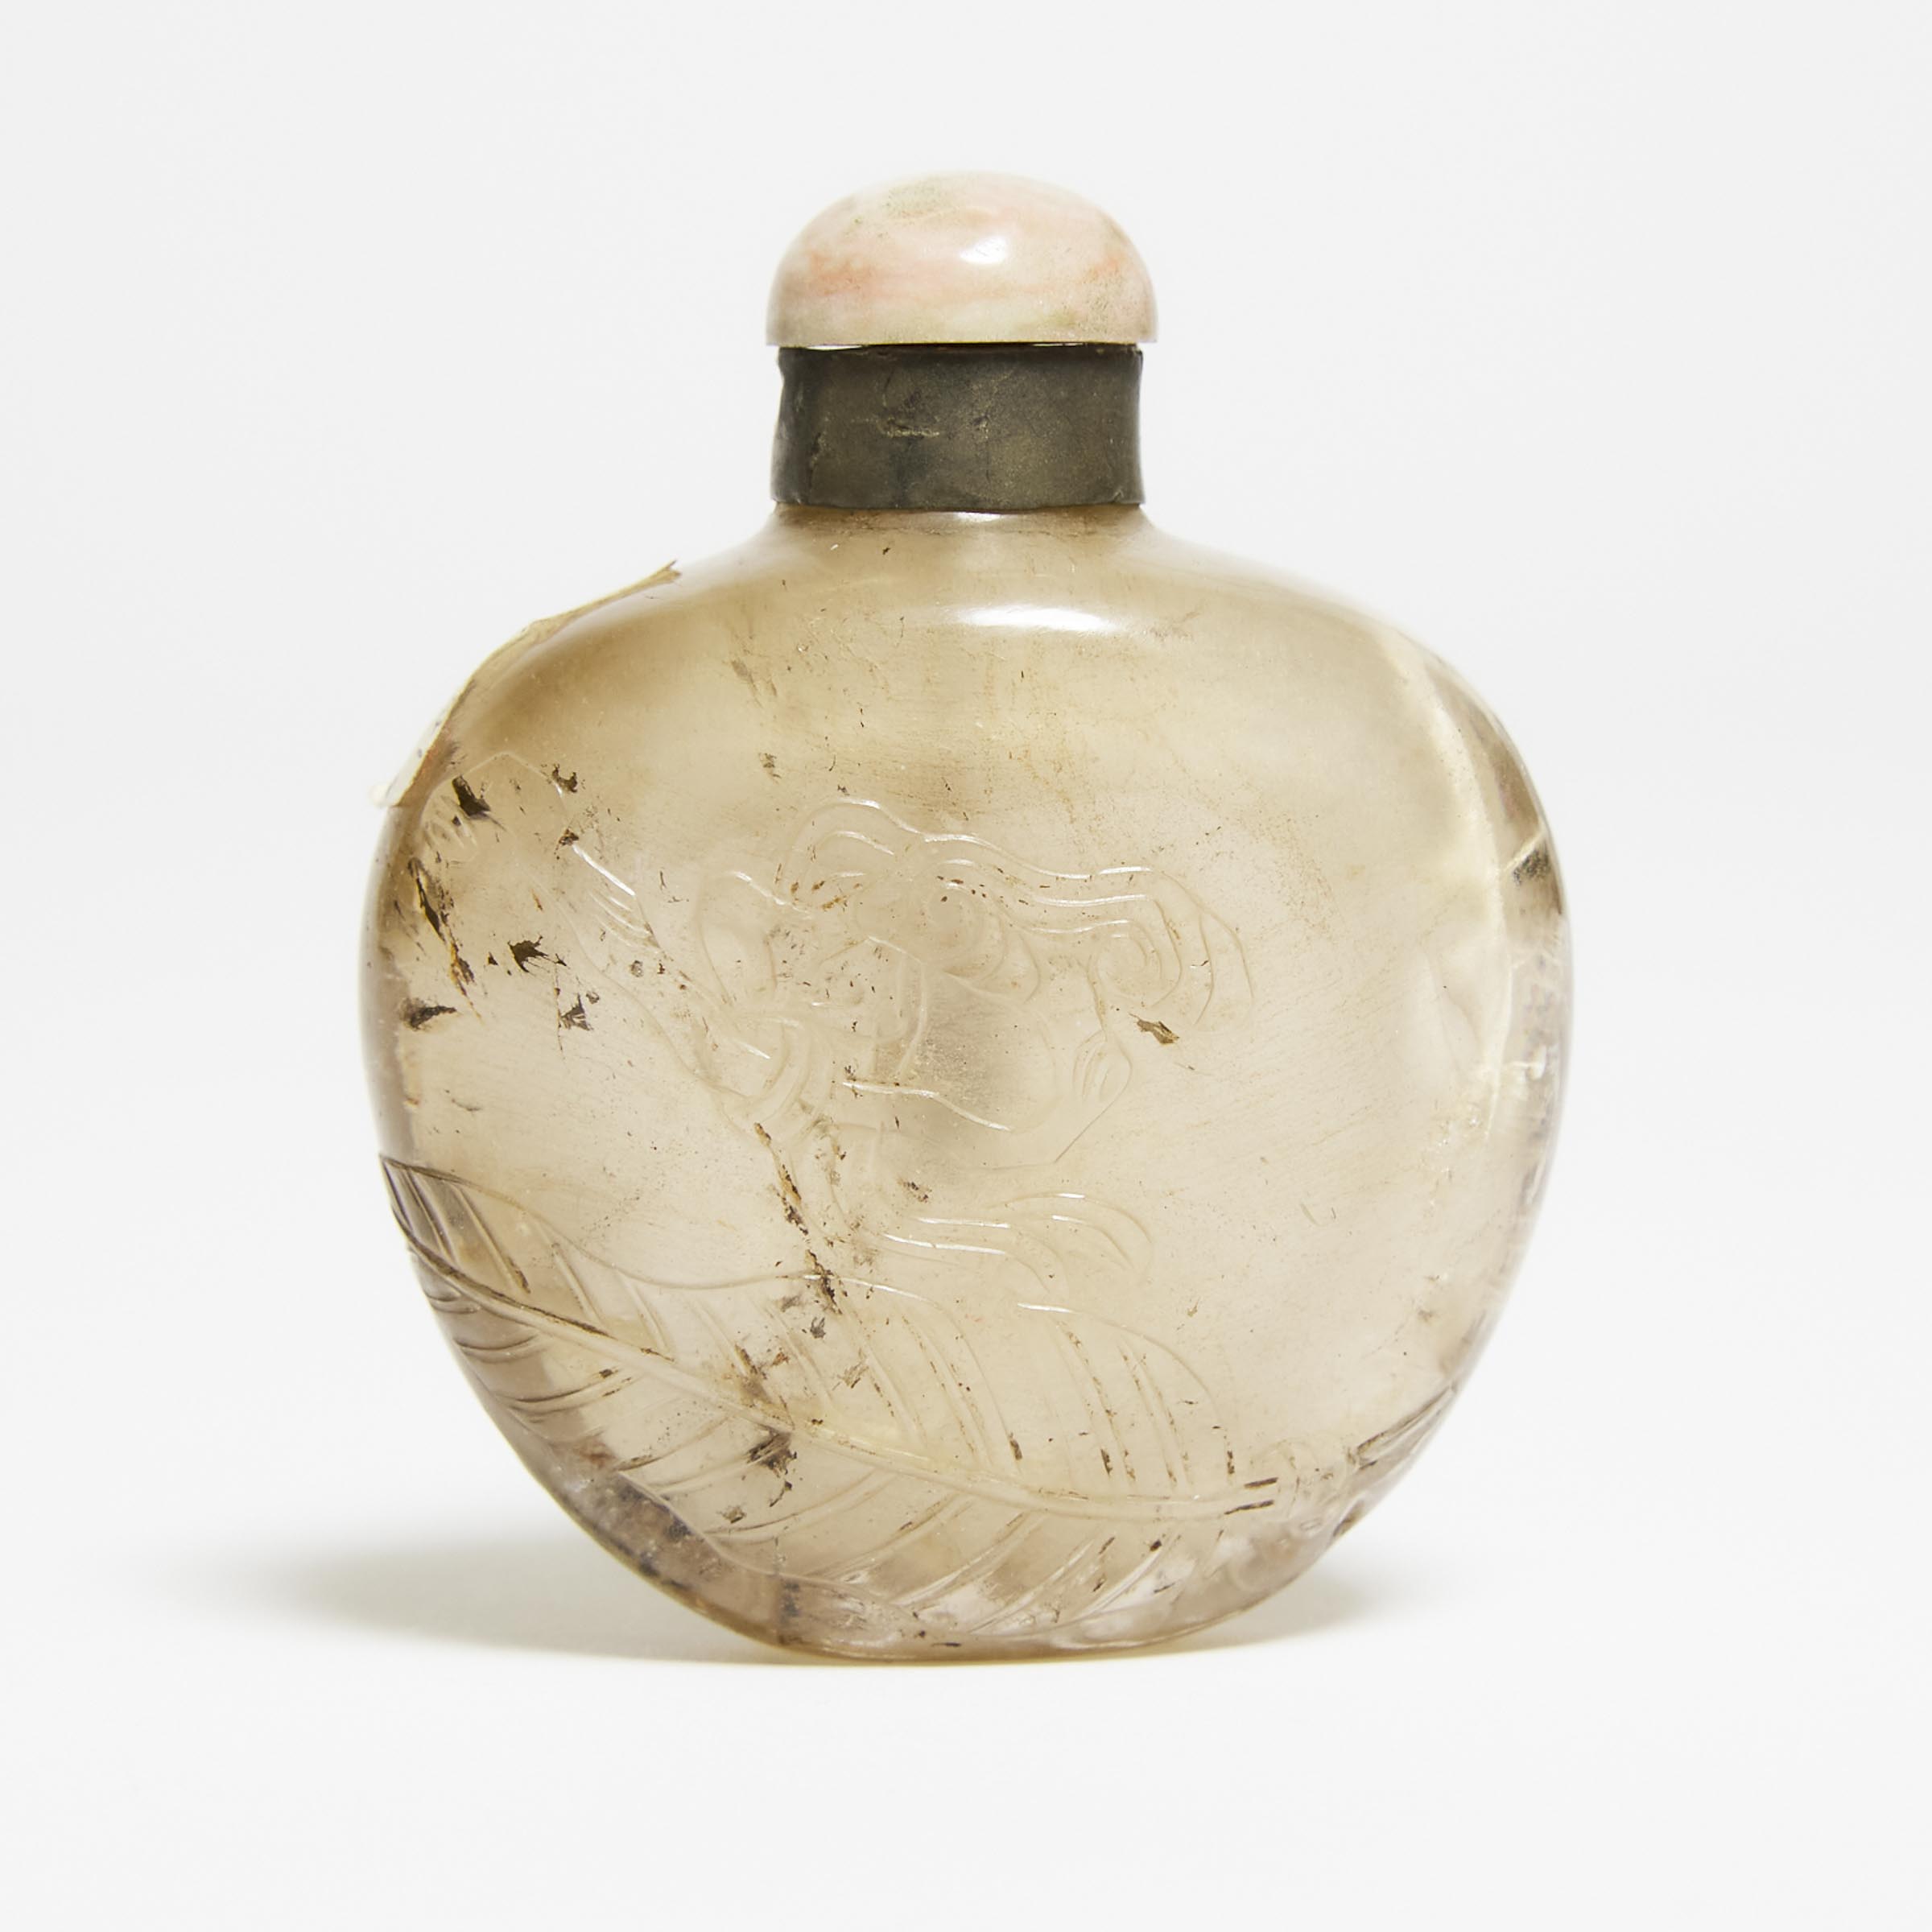 A Finely Carved Smoky Quartz 'Toad and Bats' Snuff Bottle, Daoguang Period (1821-1850)